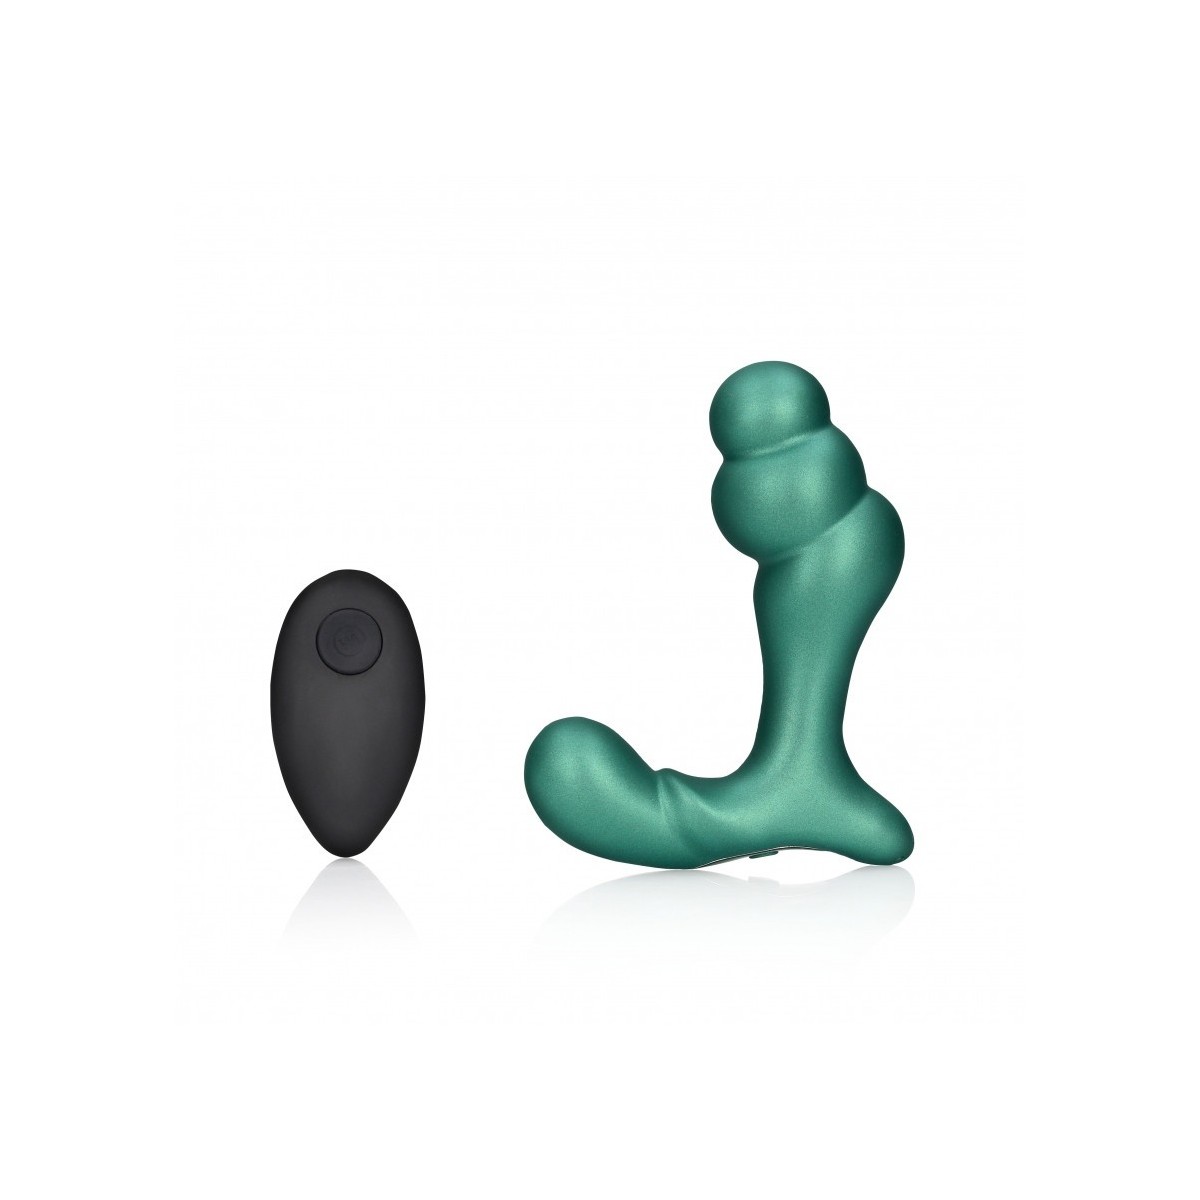 Vibratore anale per prostata Stacked Vibrating Prostate Massager with Remote Control Metallic Green